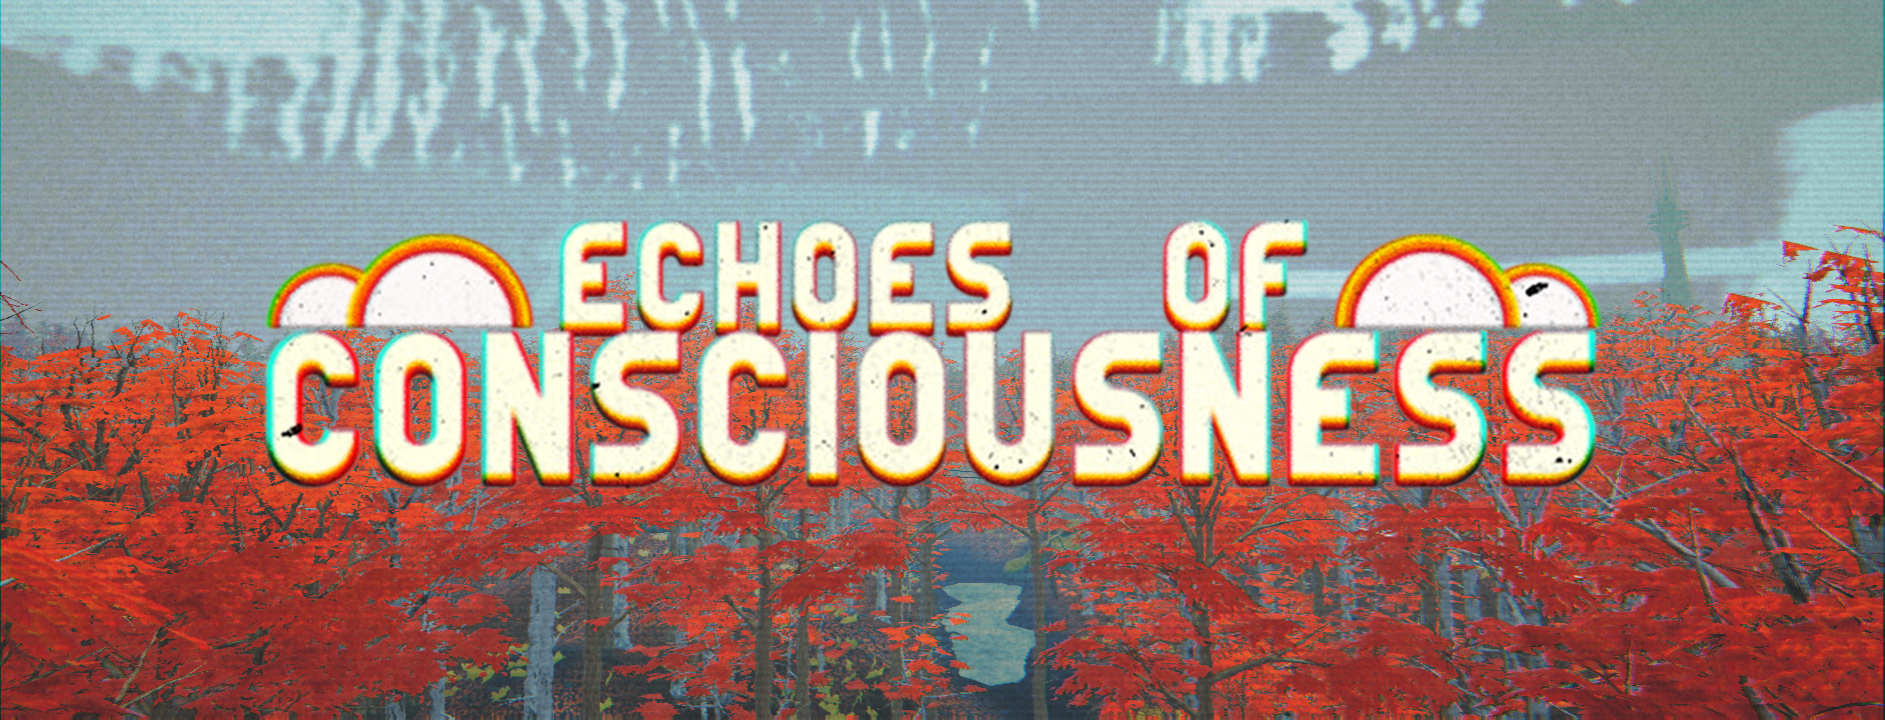 Echoes of Consciousness